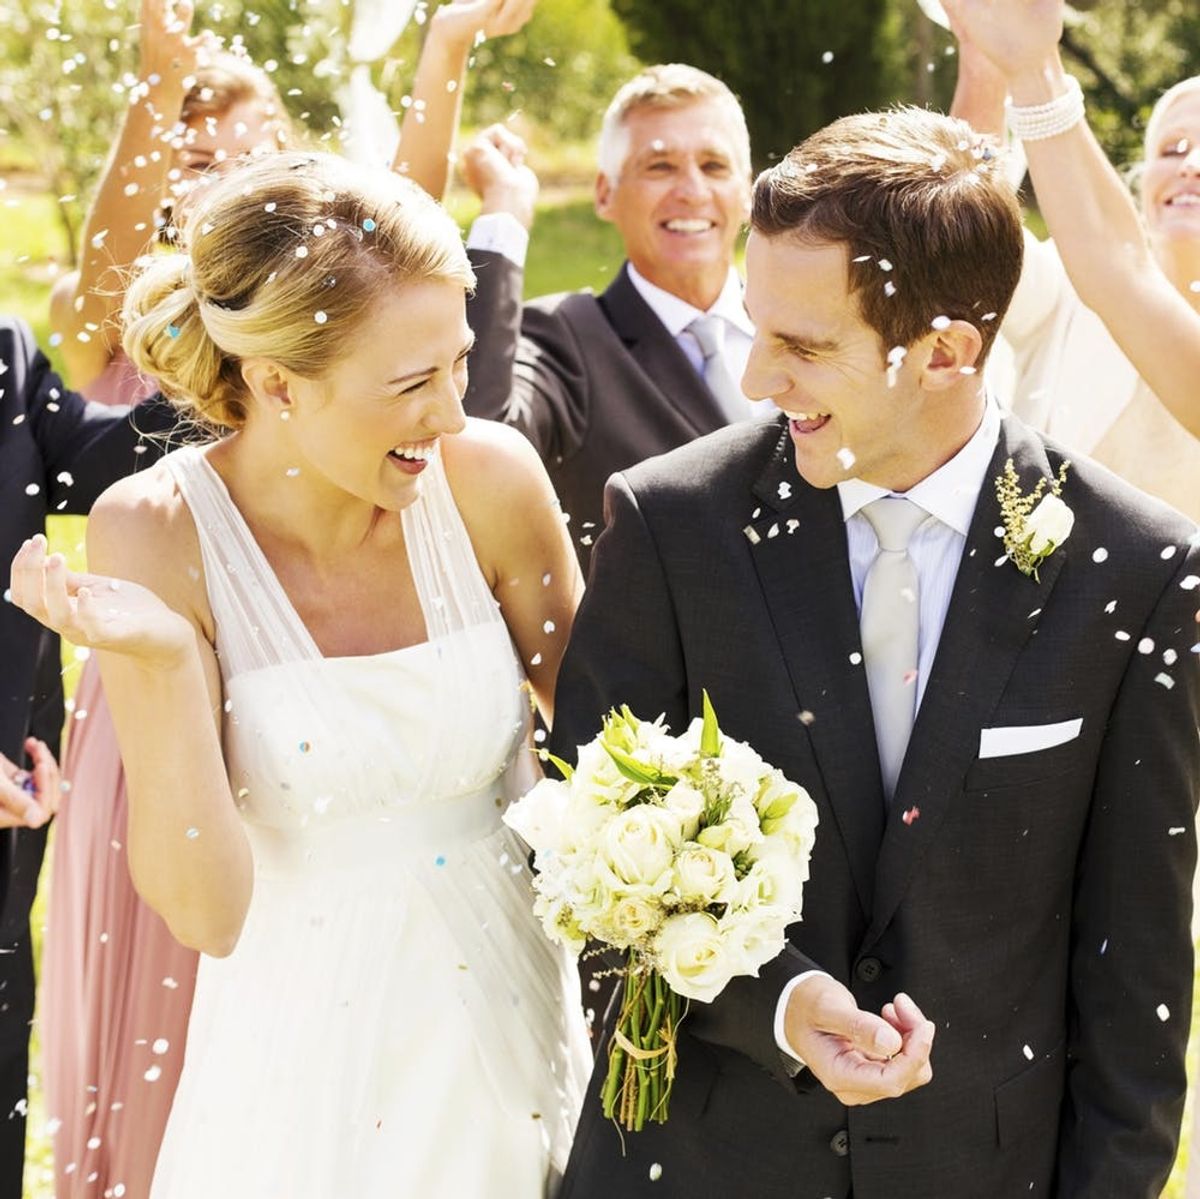 Cutting Wedding Costs Can Be Key to Staying Married